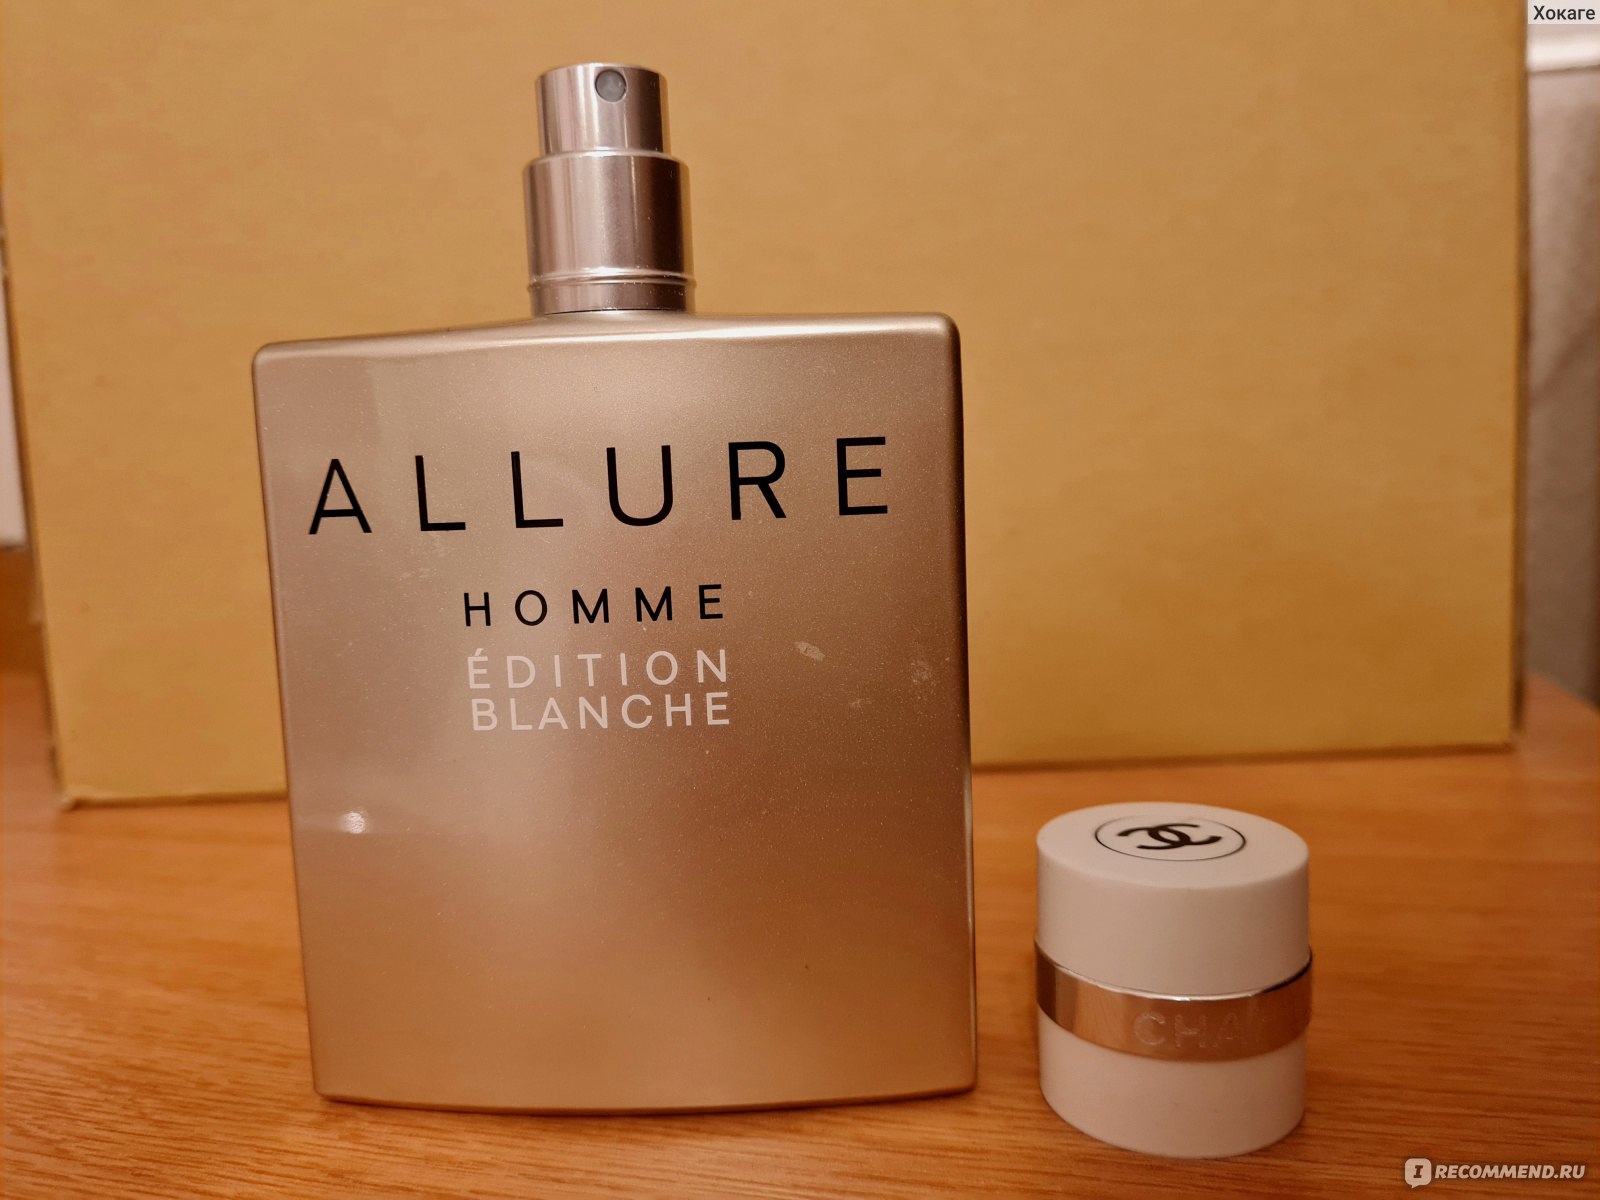 Chanel homme edition blanche. Парфюмерная вода Chanel Allure homme Edition Blanche. Chanel Allure homme Edition Blanche парфюмерная вода 100мл. Chanel мужские. Allure homme Edition Blanche 150ml. Chanel мужс. Allure homme Edition Blanche 150 ml.